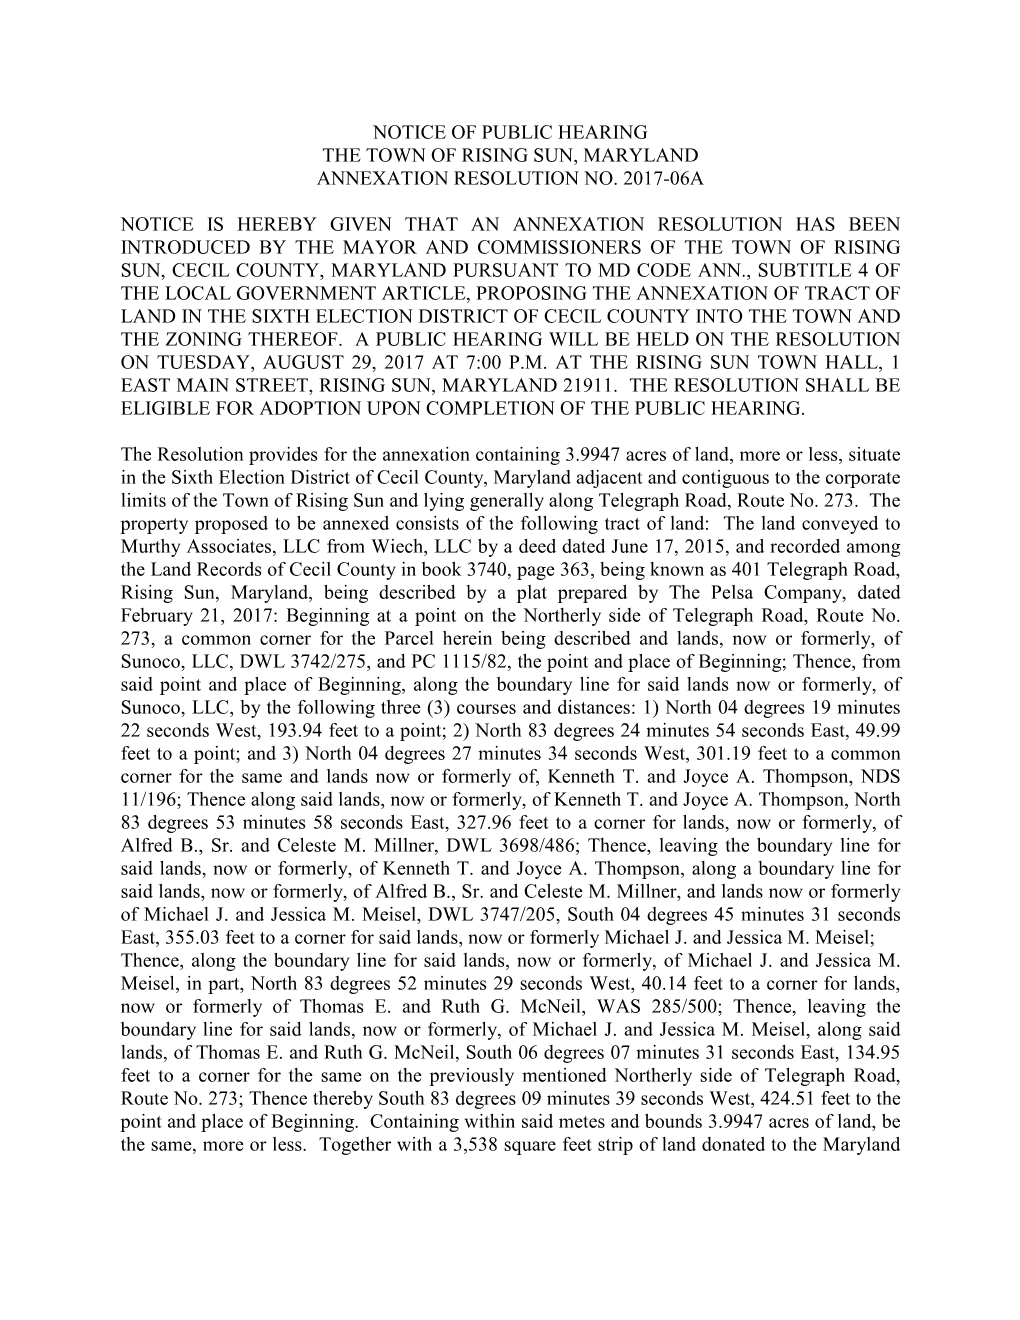 Notice of Public Hearing the Town of Rising Sun, Maryland Annexation Resolution No